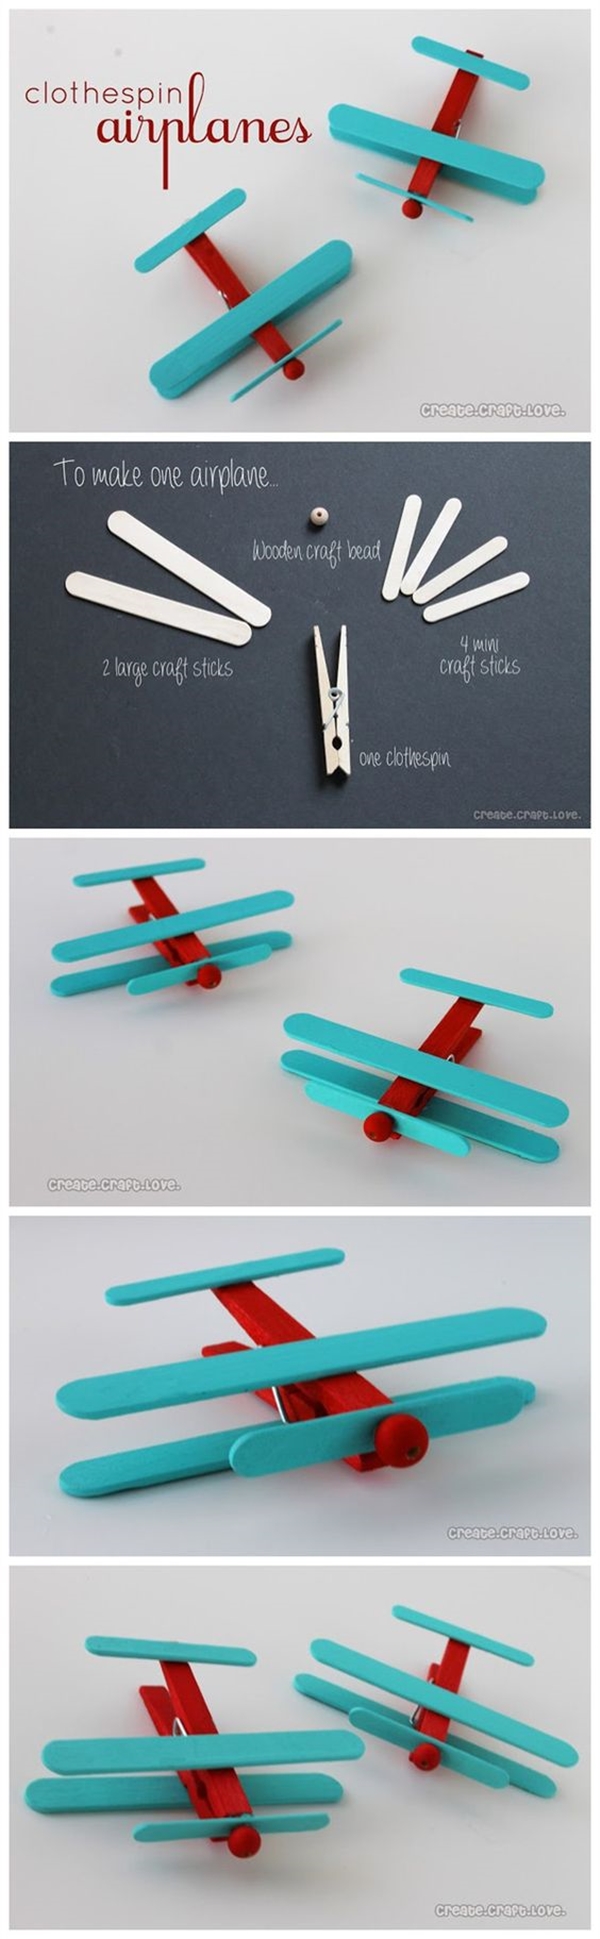 Amazing Popsicle Stick Crafts and Projects - (14)